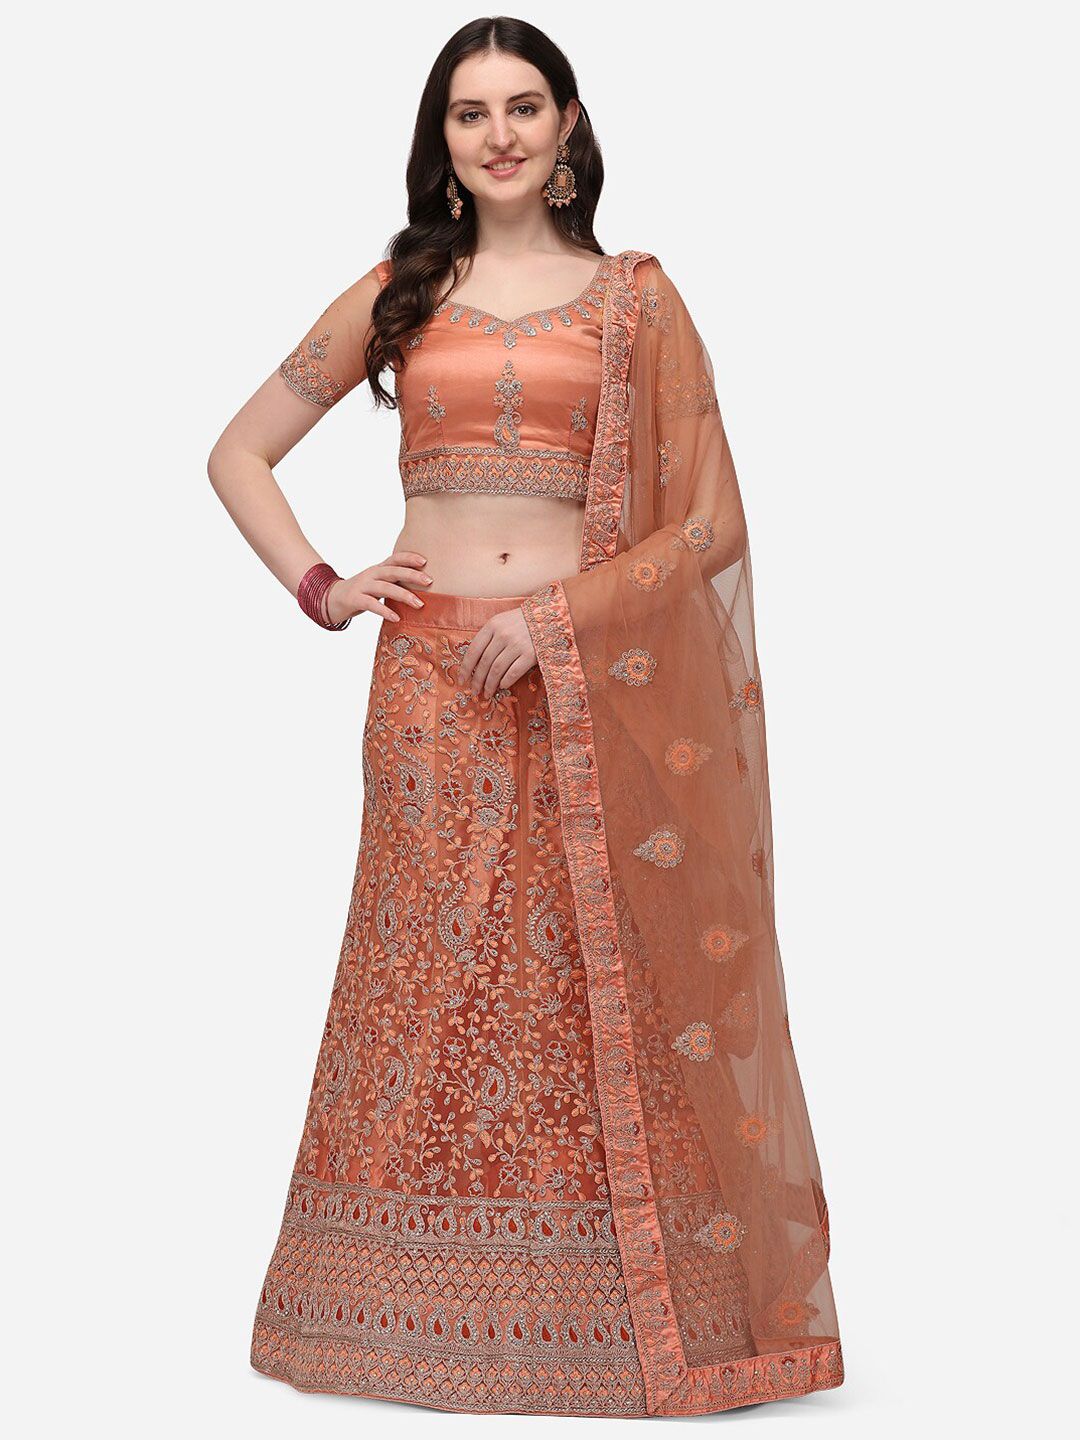 Netram Peach-Coloured Embroidered Semi-Stitched Lehenga & Unstitched Blouse With Dupatta Price in India